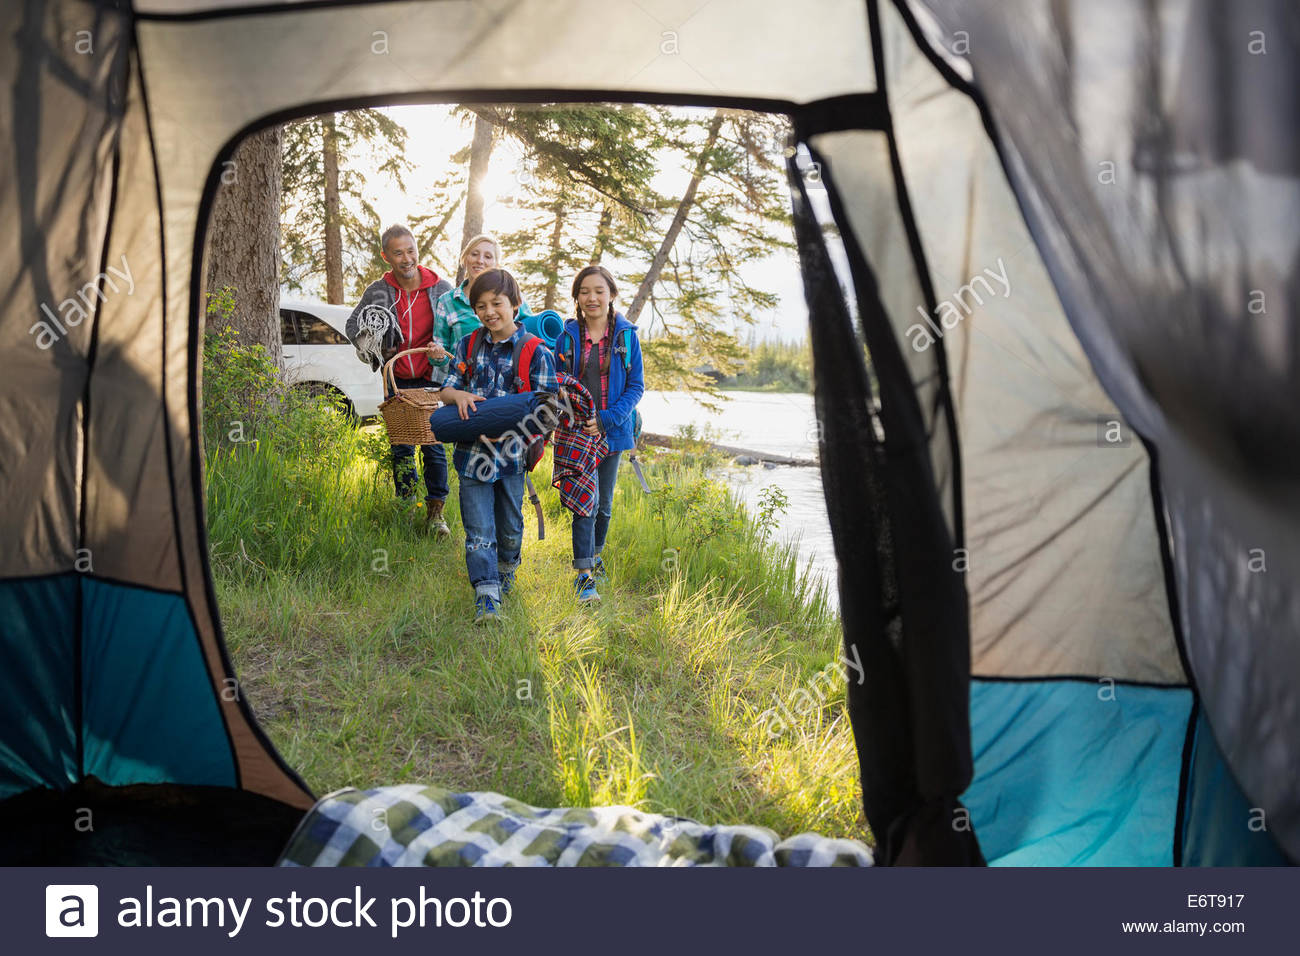 Family carrying gear at campsite Stock Photo